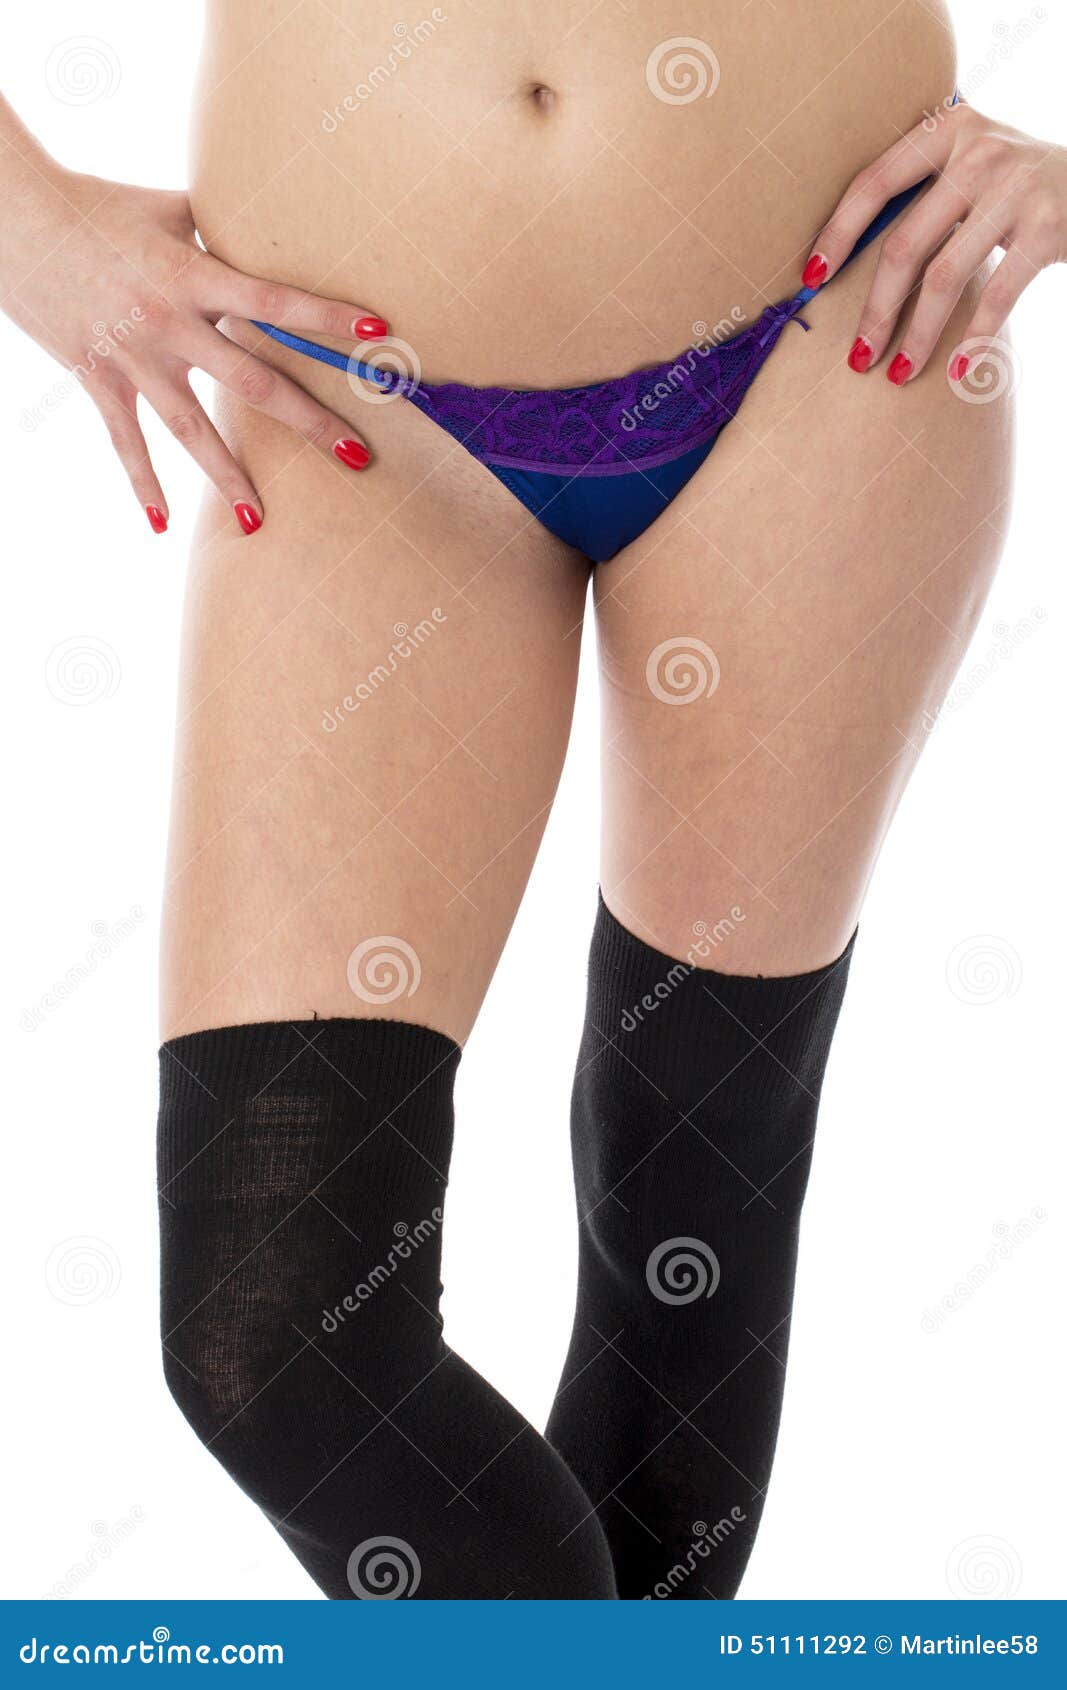 brian albea recommends Thigh Highs And Panties